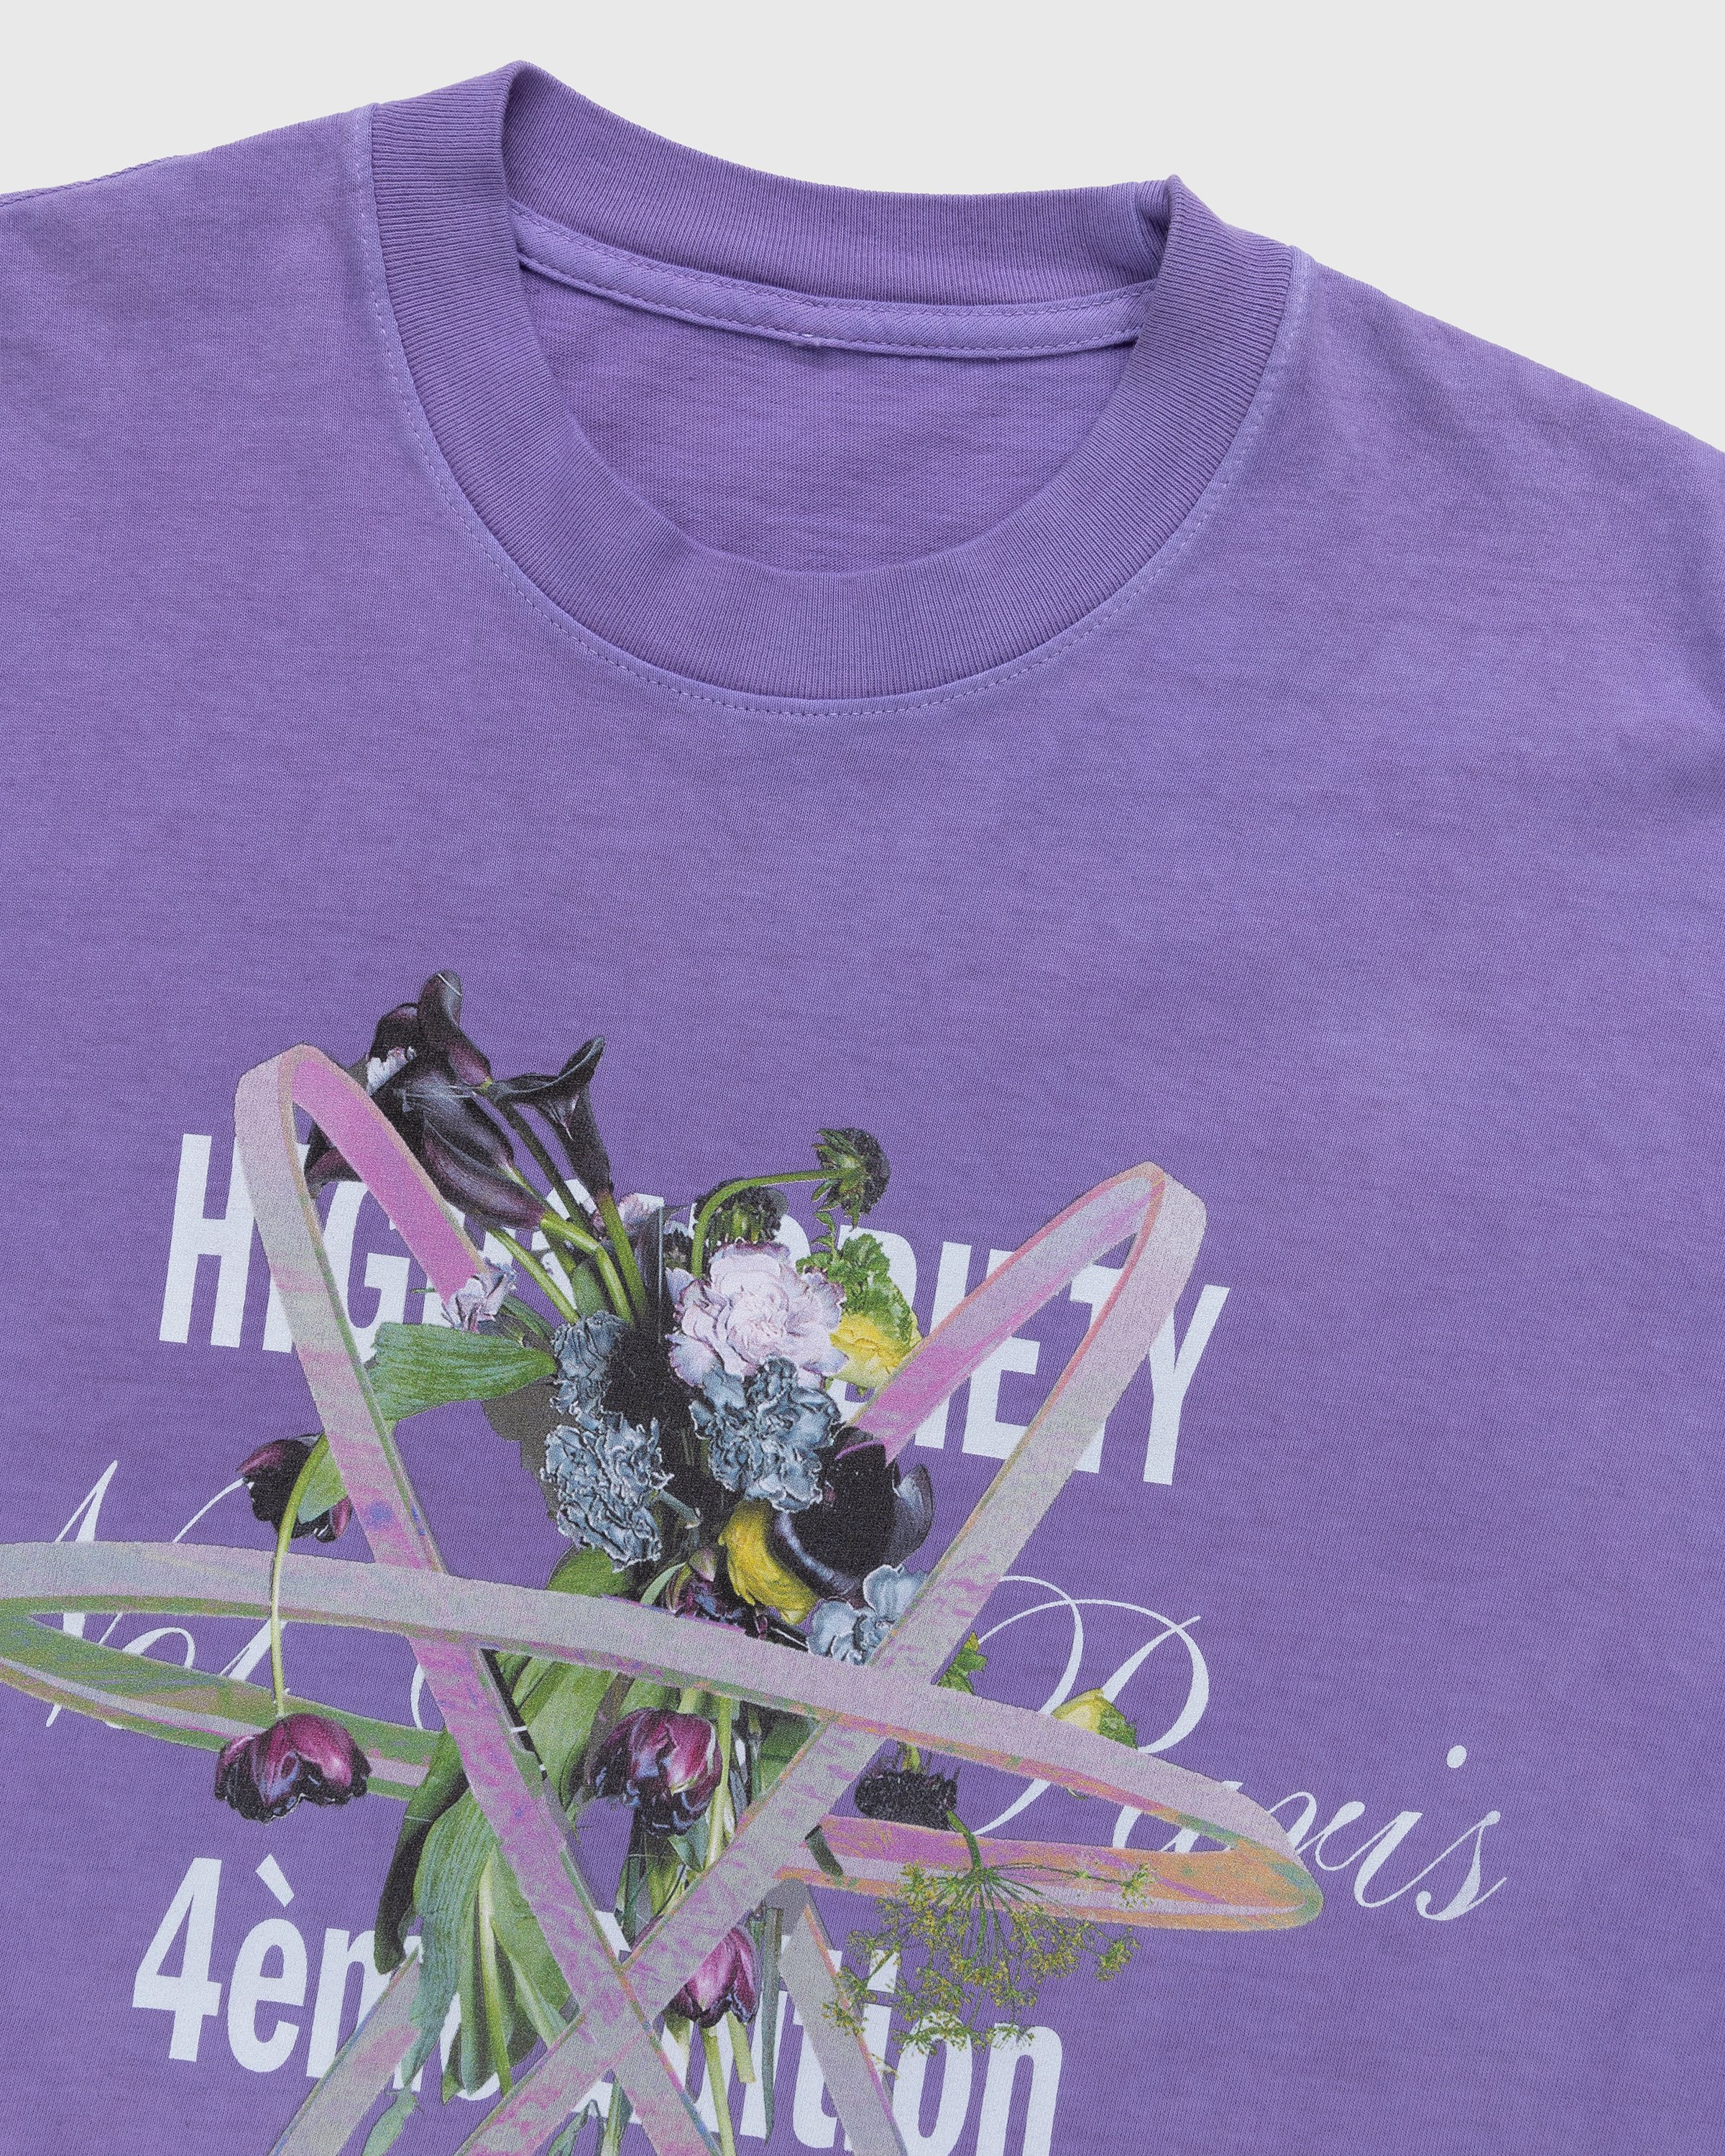 Bstroy x Highsnobiety - Not In Paris 4 Flower T-Shirt Lavender - Clothing - Purple - Image 3